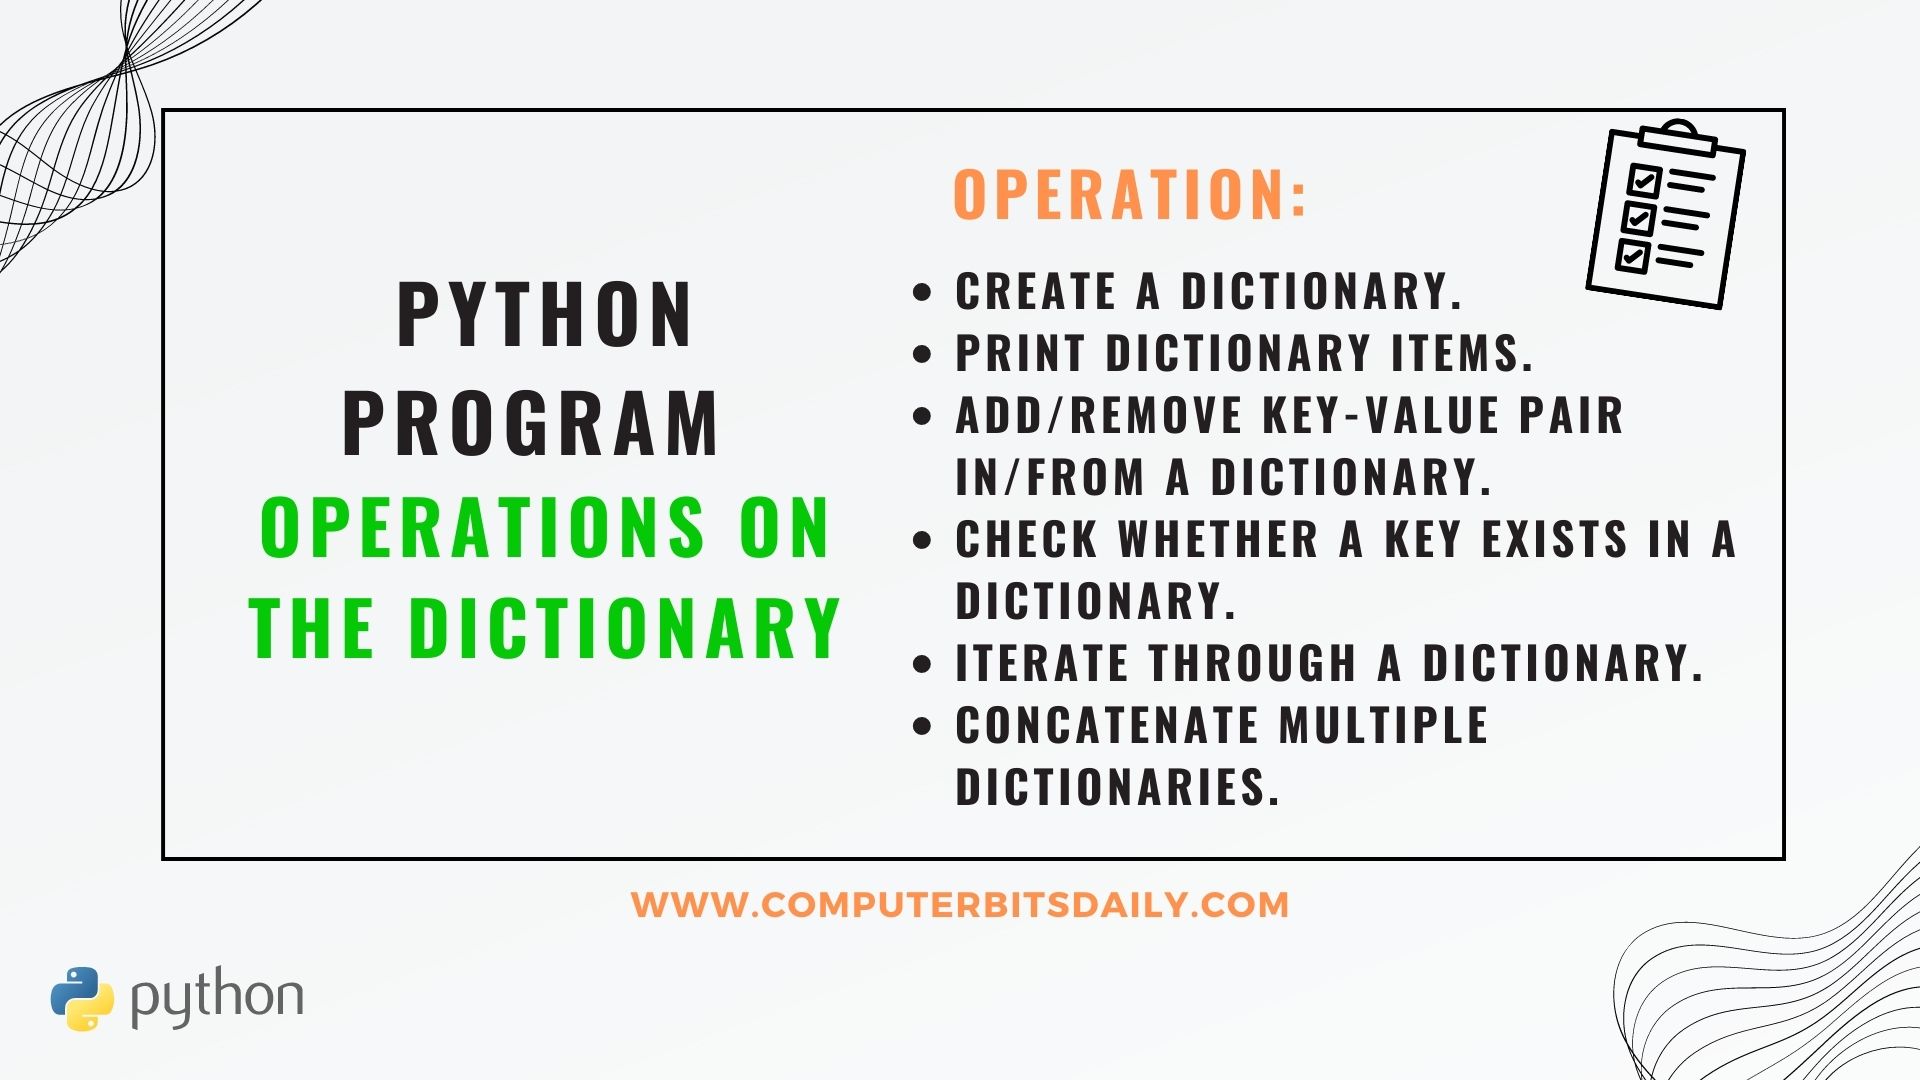 How to Add Items to a Python Dictionary?